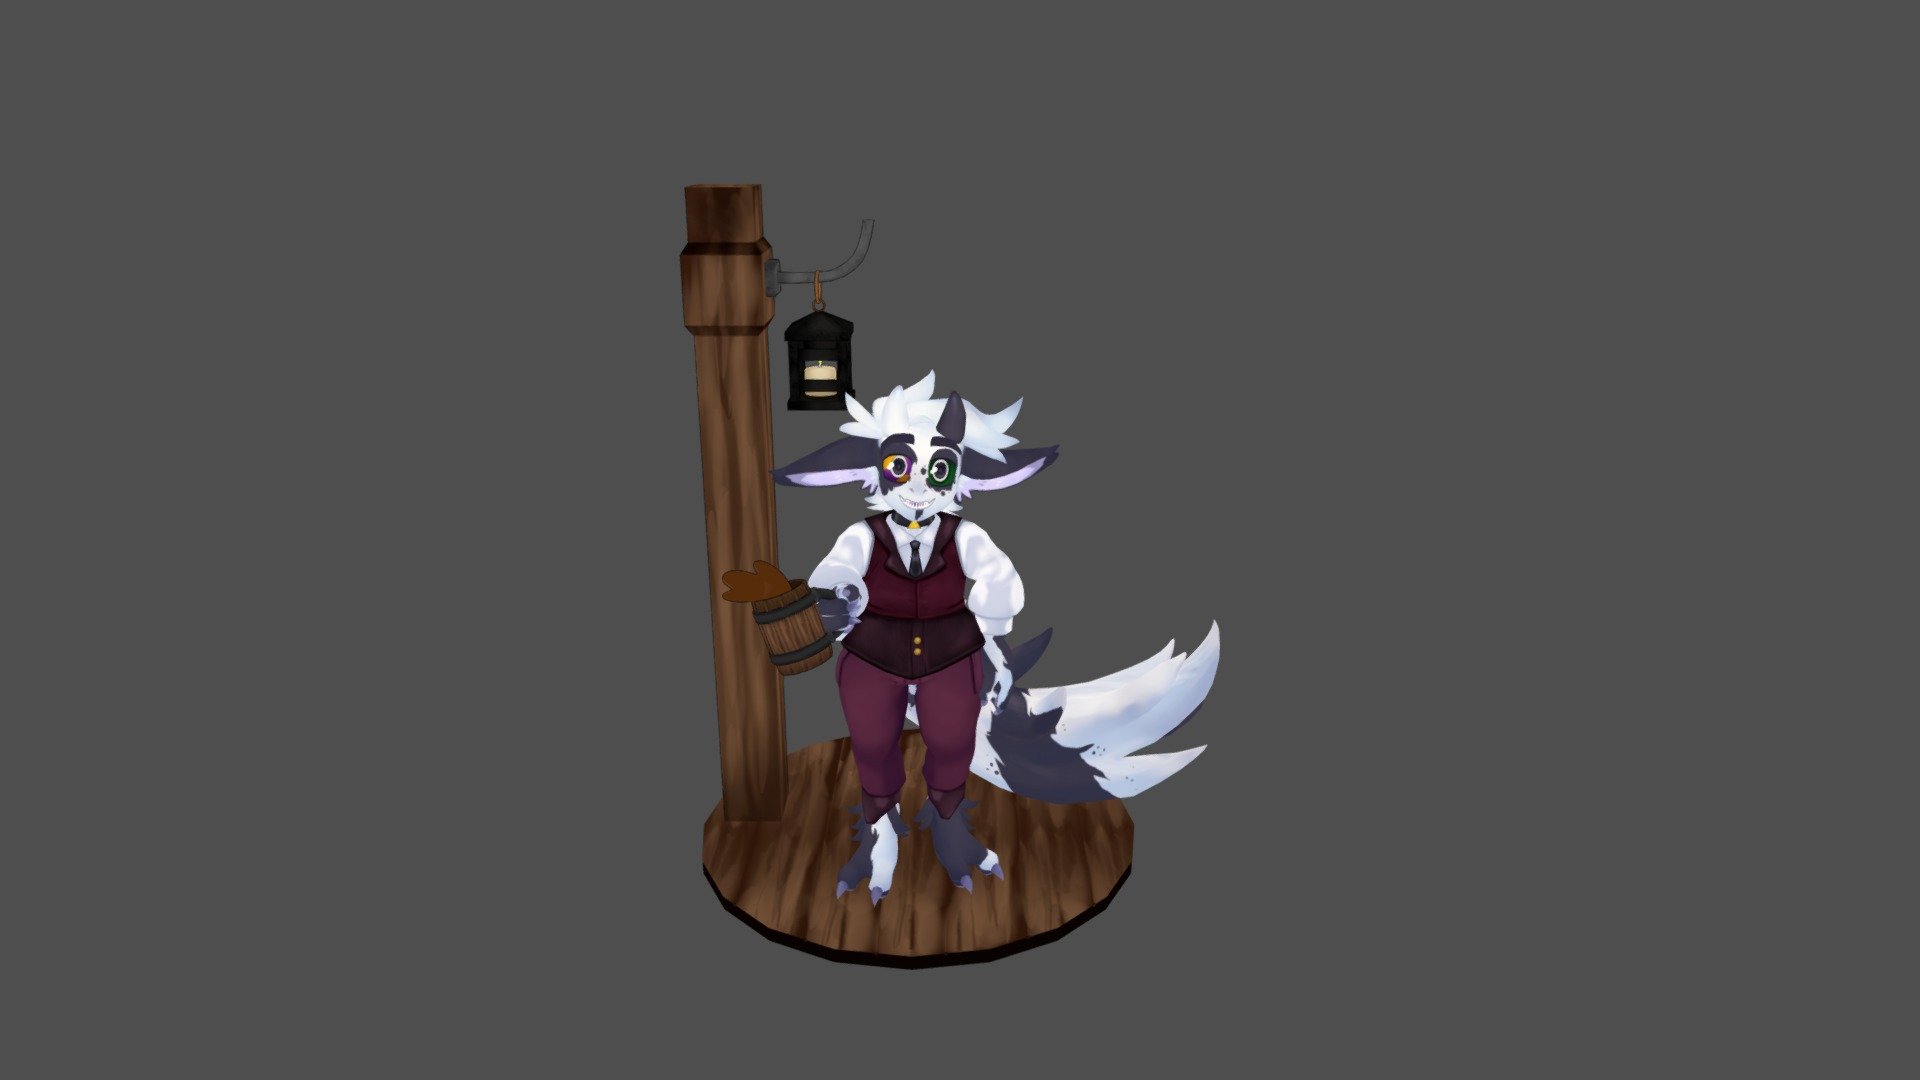 Commission for Dime on twitter - Dime - 3D model by Carly.Simmons 3d model